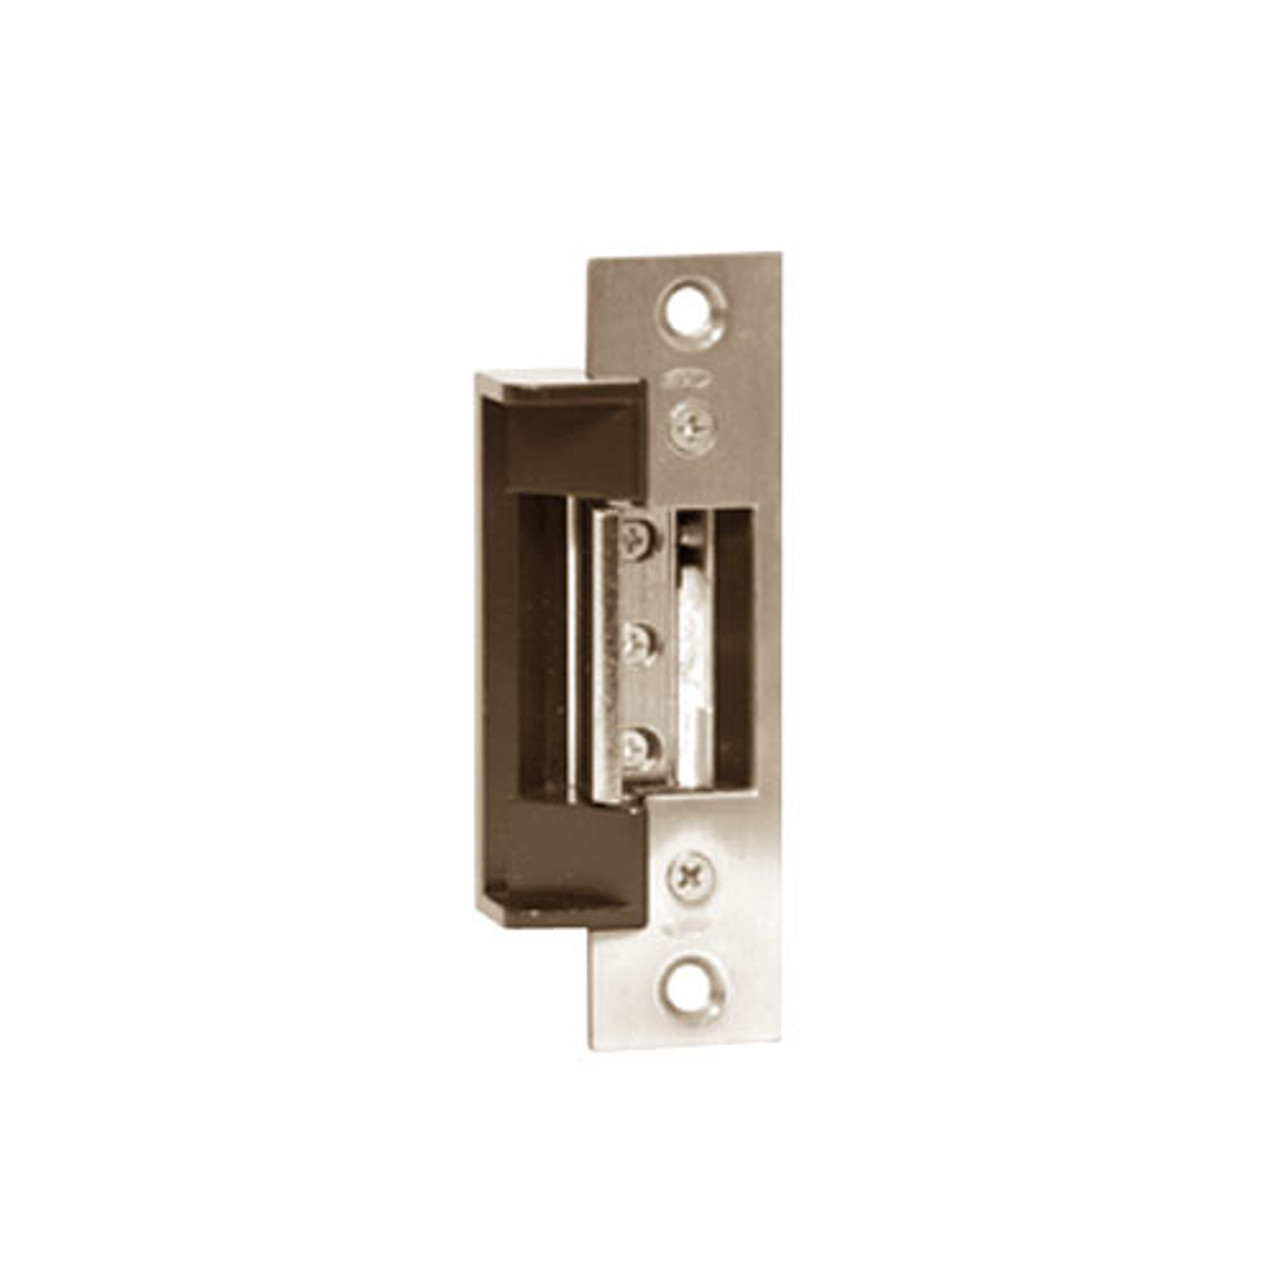 7314-09-32D RCI 7 Series Adjustable Electric Strike for ANSI Centerline Latch Entry in Brushed Stainless Steel Finish